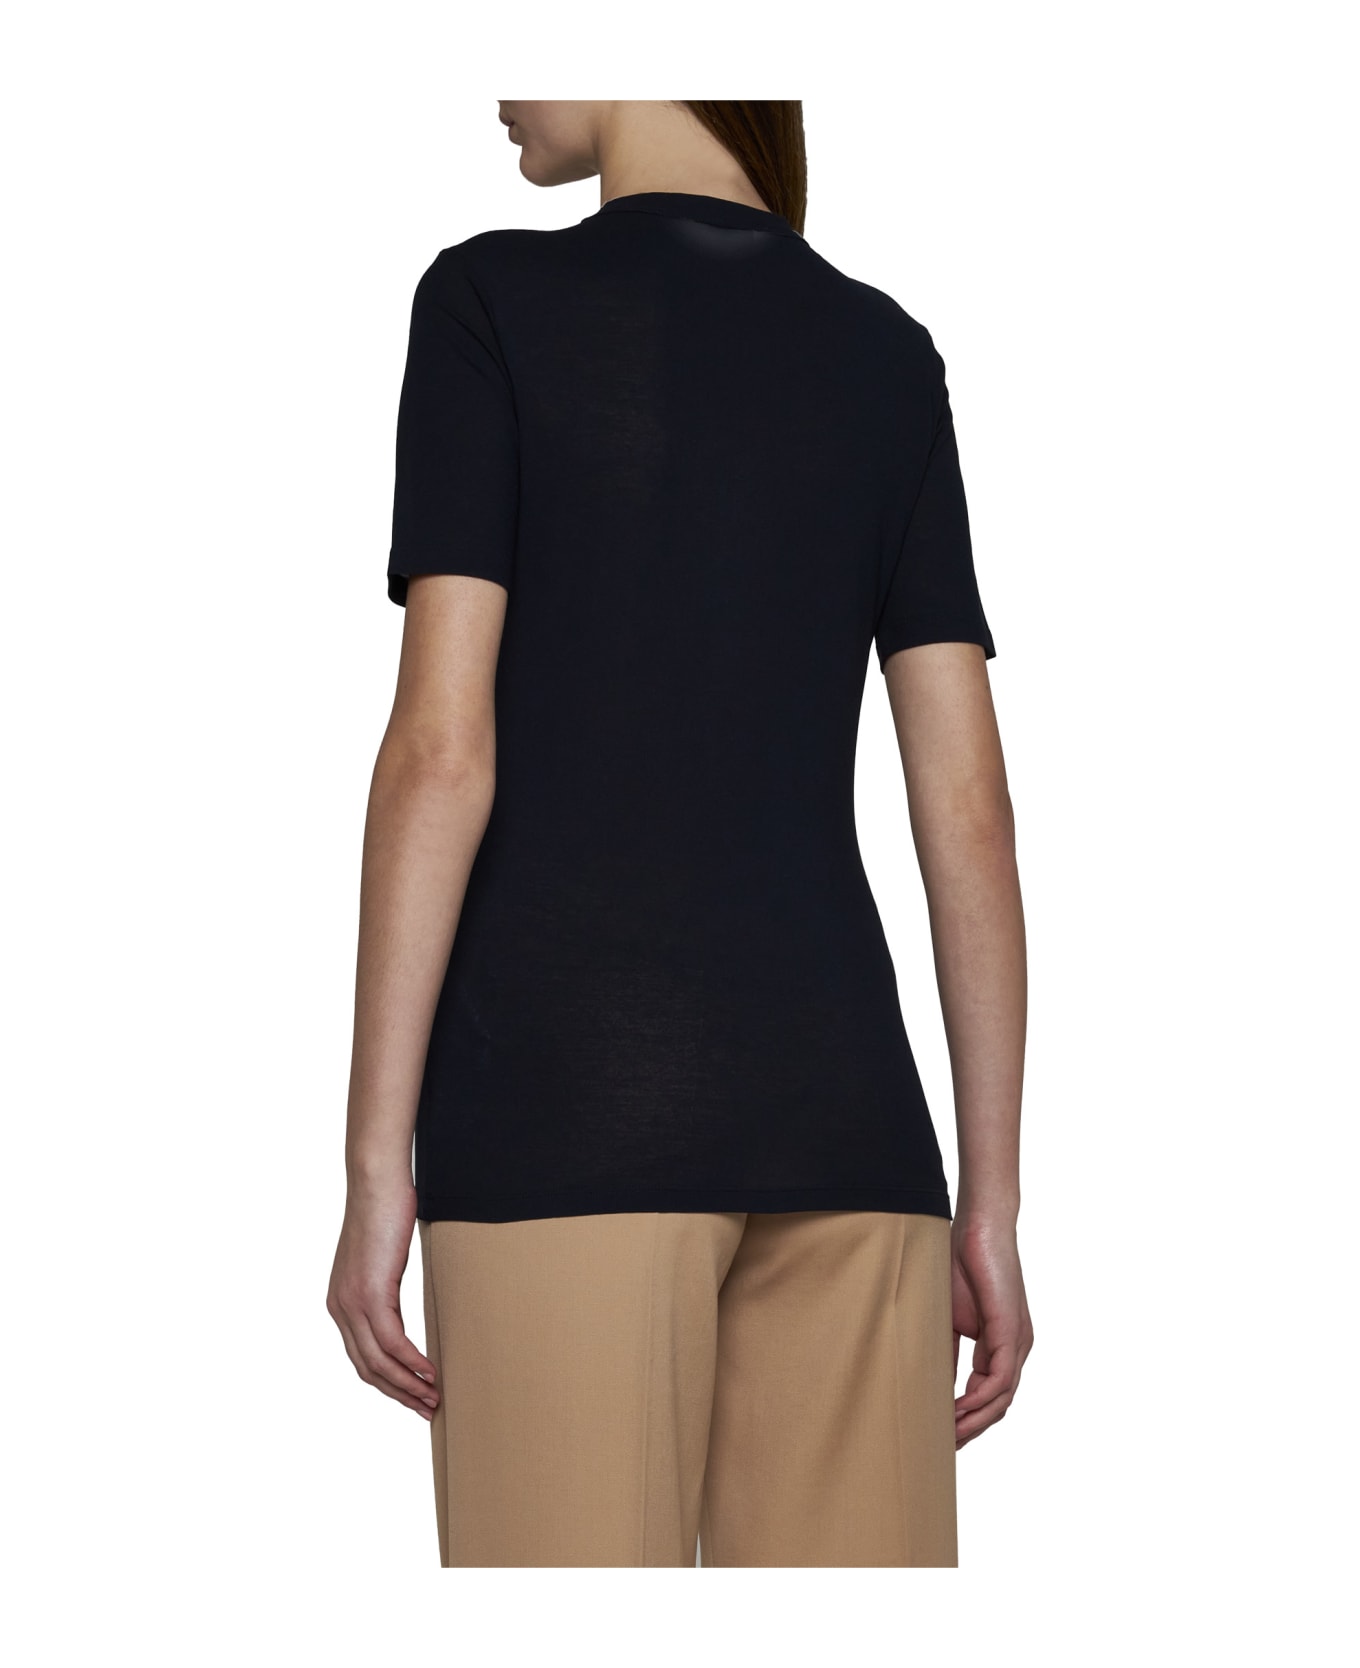 Jil Sander Night Blue Cotton Jersey Regular T-shirt By Ganni With Sleeve And Front Print. - Midnight